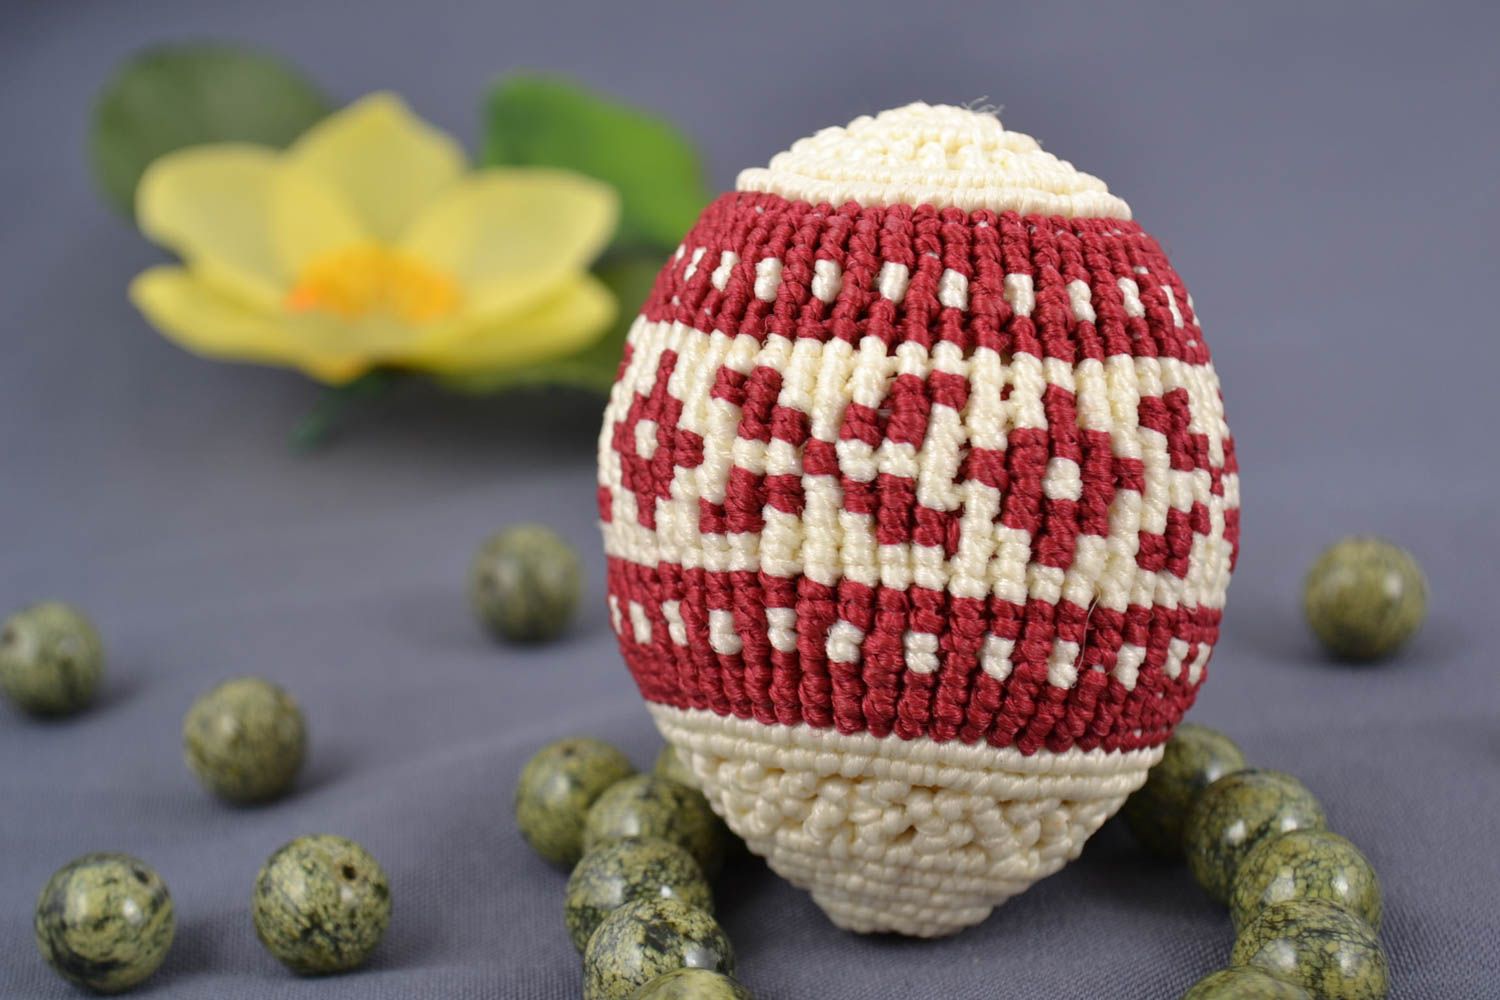 Designer decorative macrame woven Easter egg with ornament and wooden basis photo 1